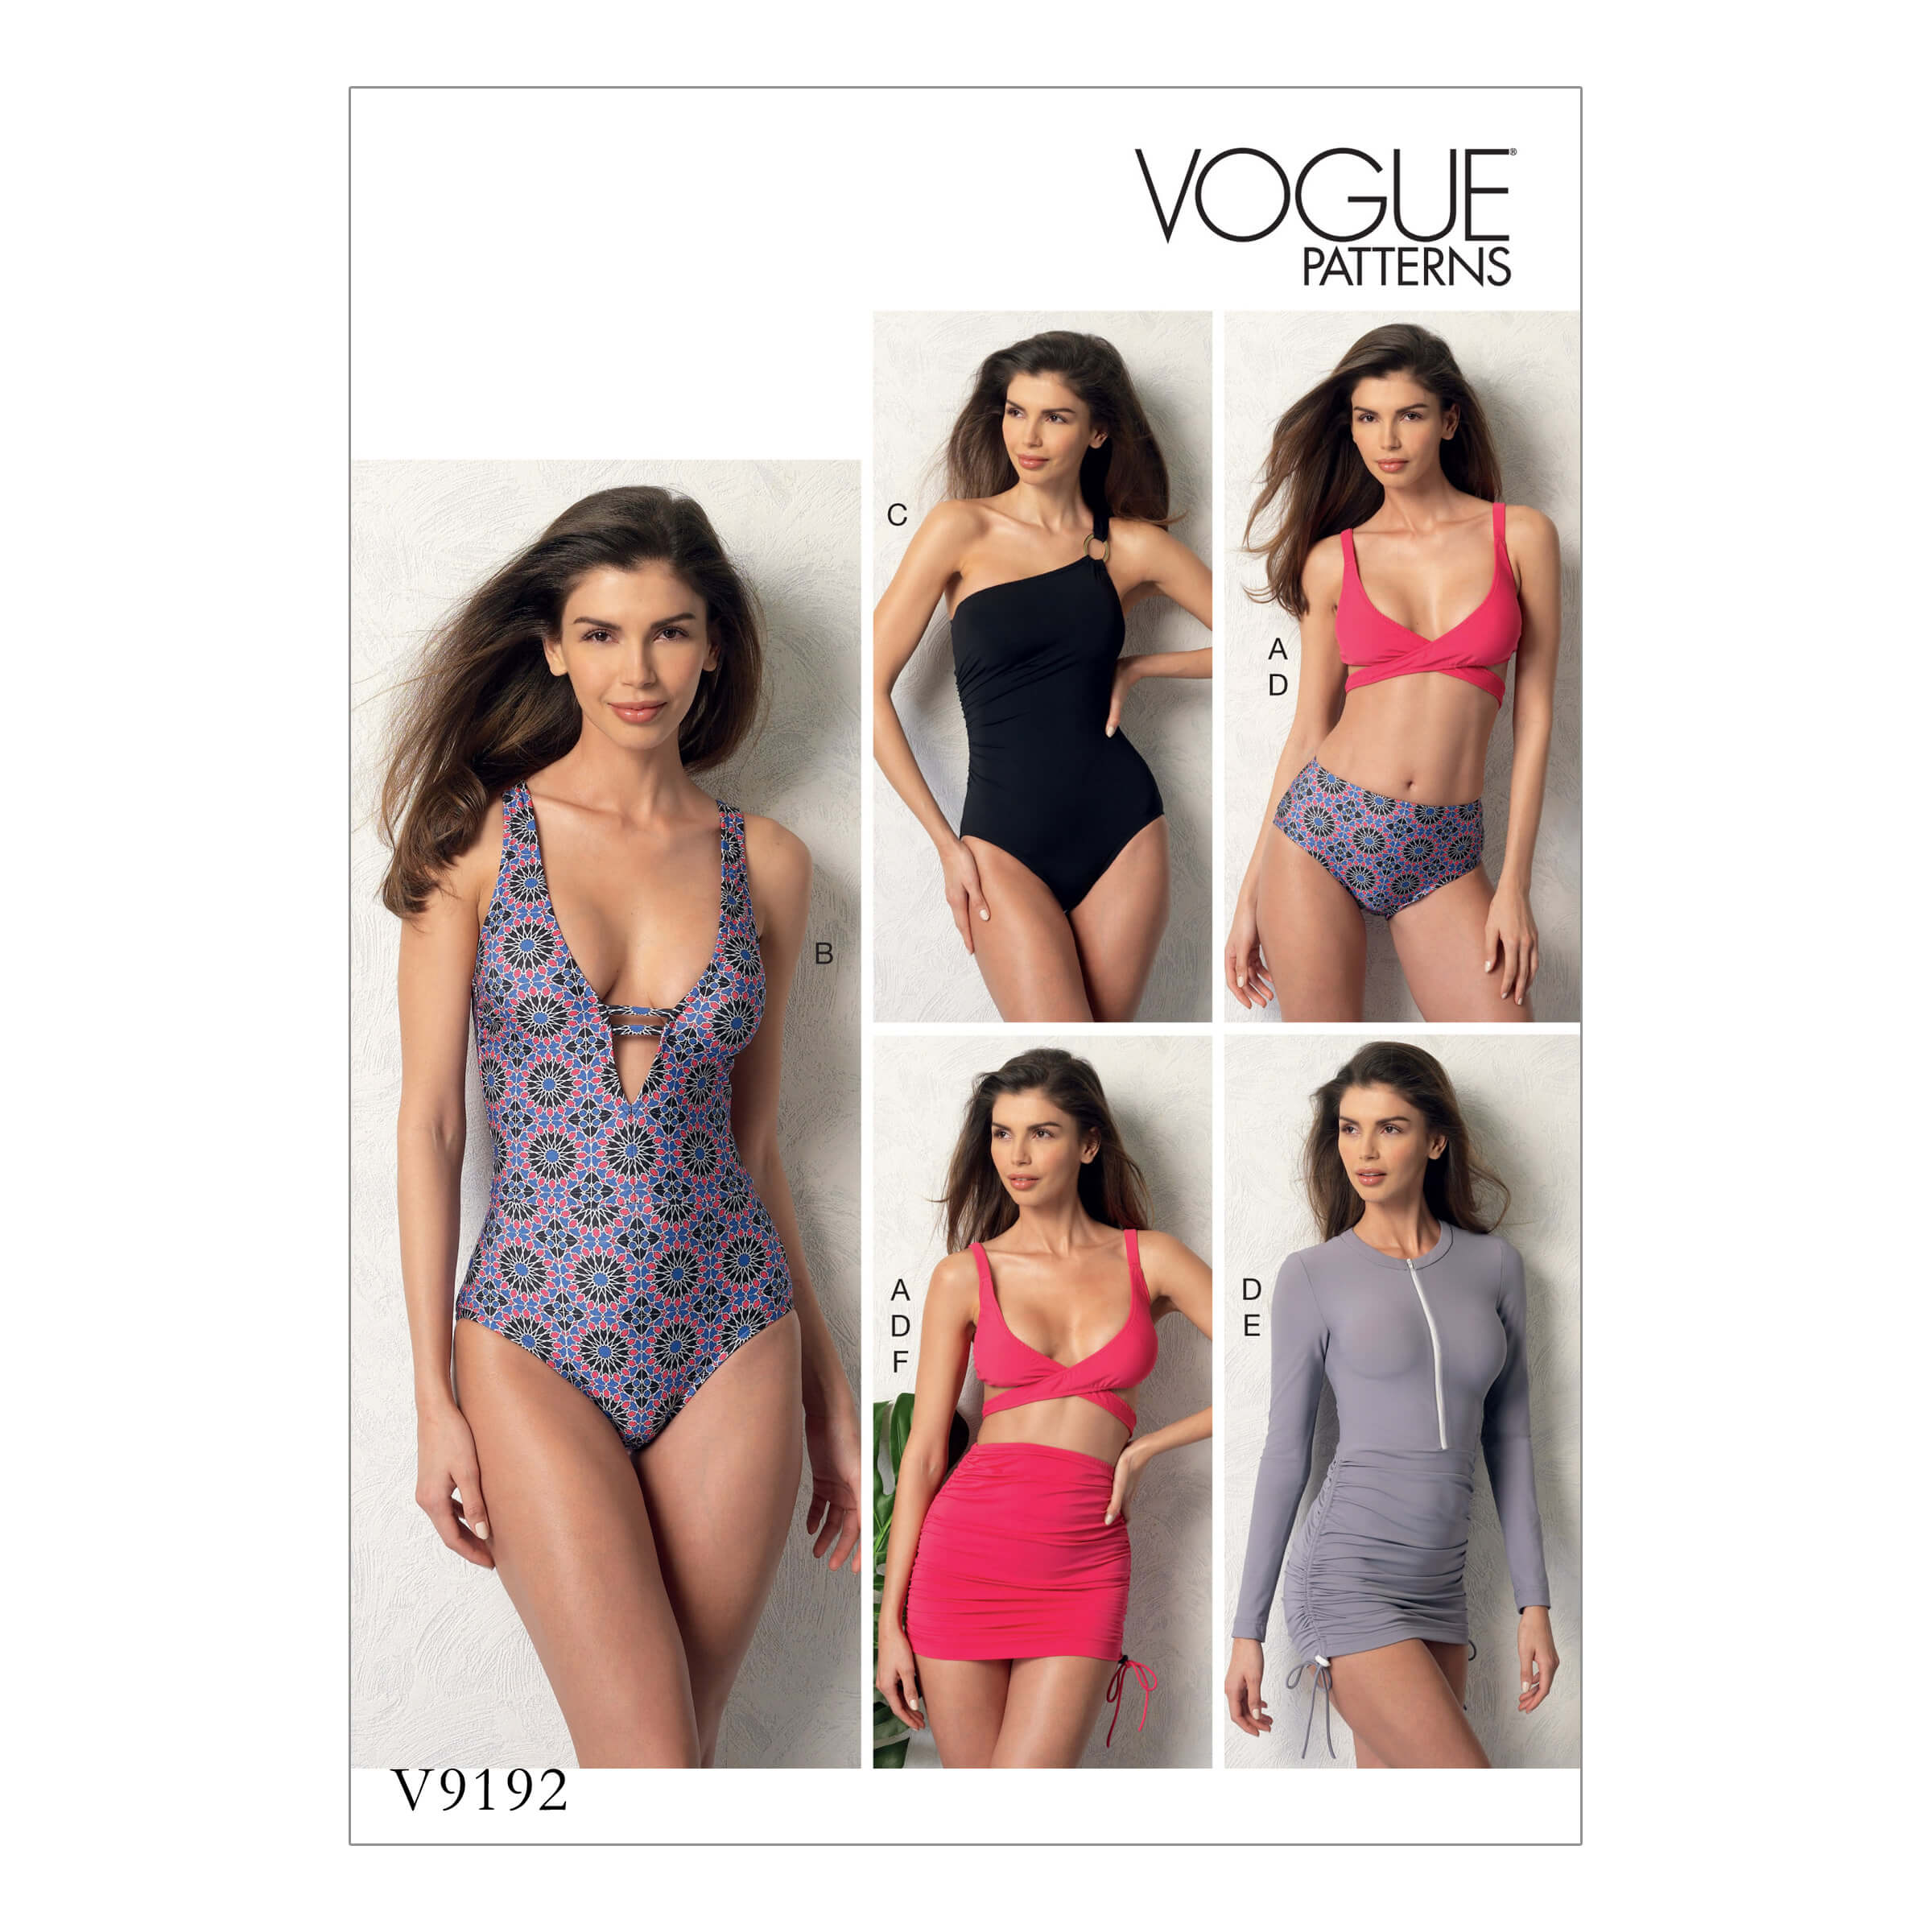 Vogue Patterns V9192 Misses' Wrap-Top Bikini, One-Piece Swimsuits, and Cover-Ups